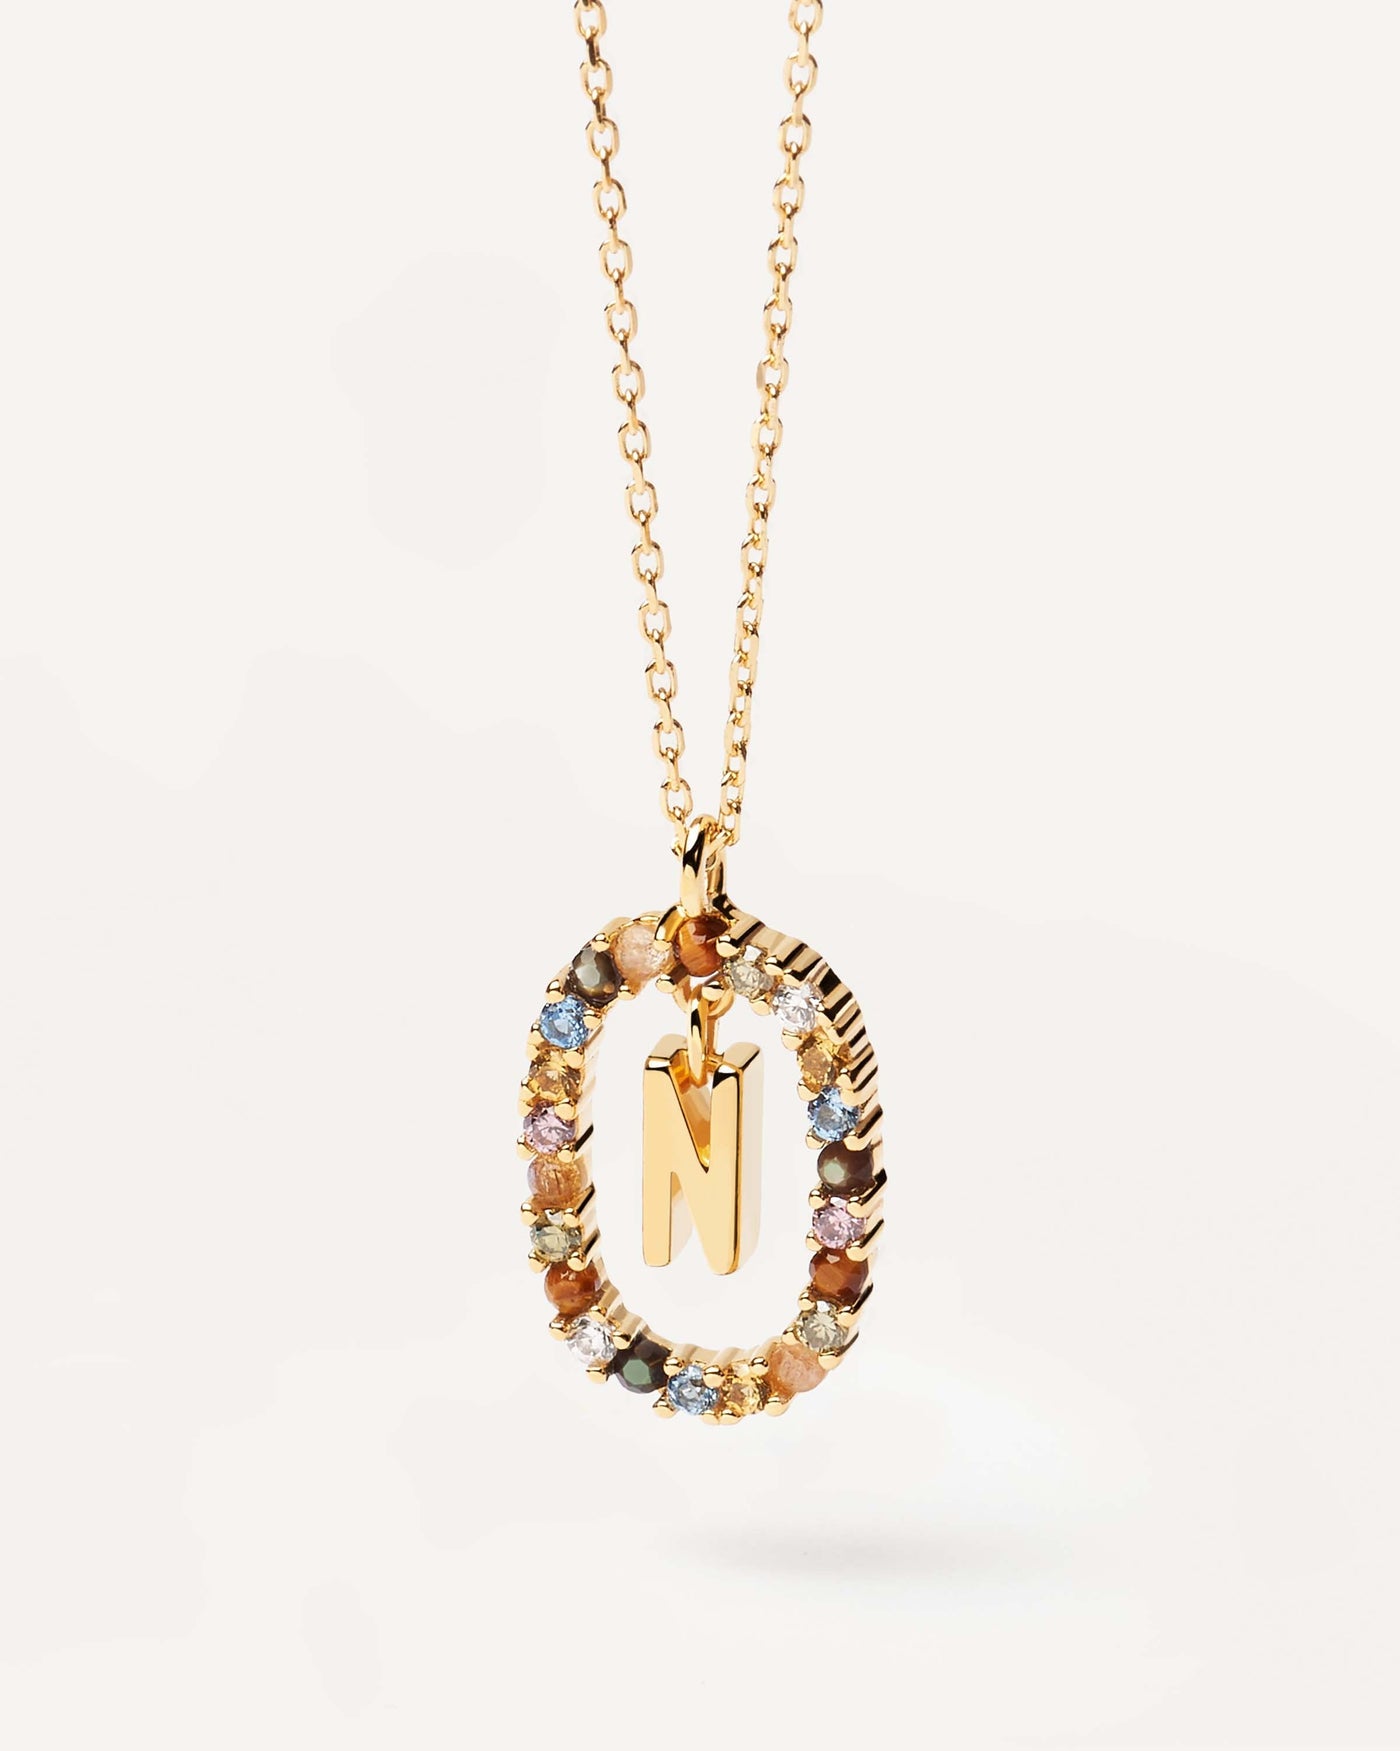 2023 Selection | Letter N necklace. Initial N necklace in gold-plated silver, circled by colorful gemstones. Get the latest arrival from PDPAOLA. Place your order safely and get this Best Seller. Free Shipping.